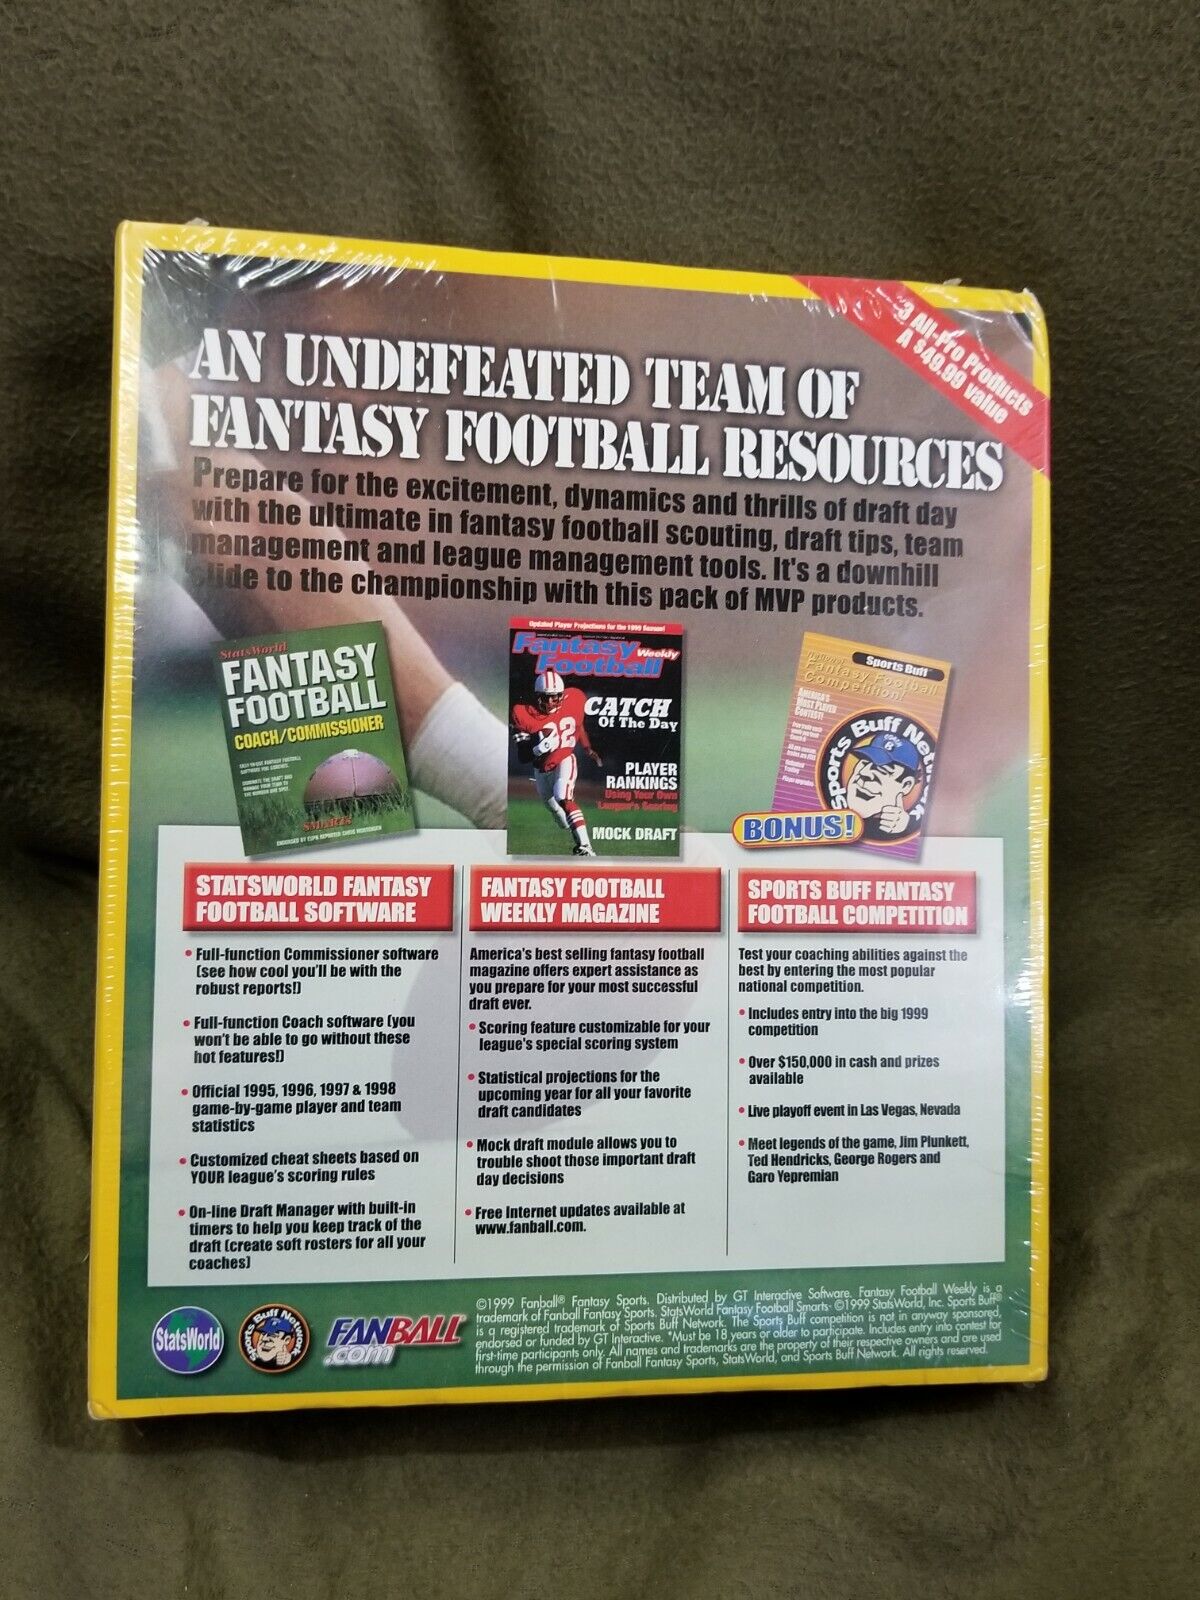 A software box back containing StatsWorld Football SMARTs PC software for both commissioners and coaches